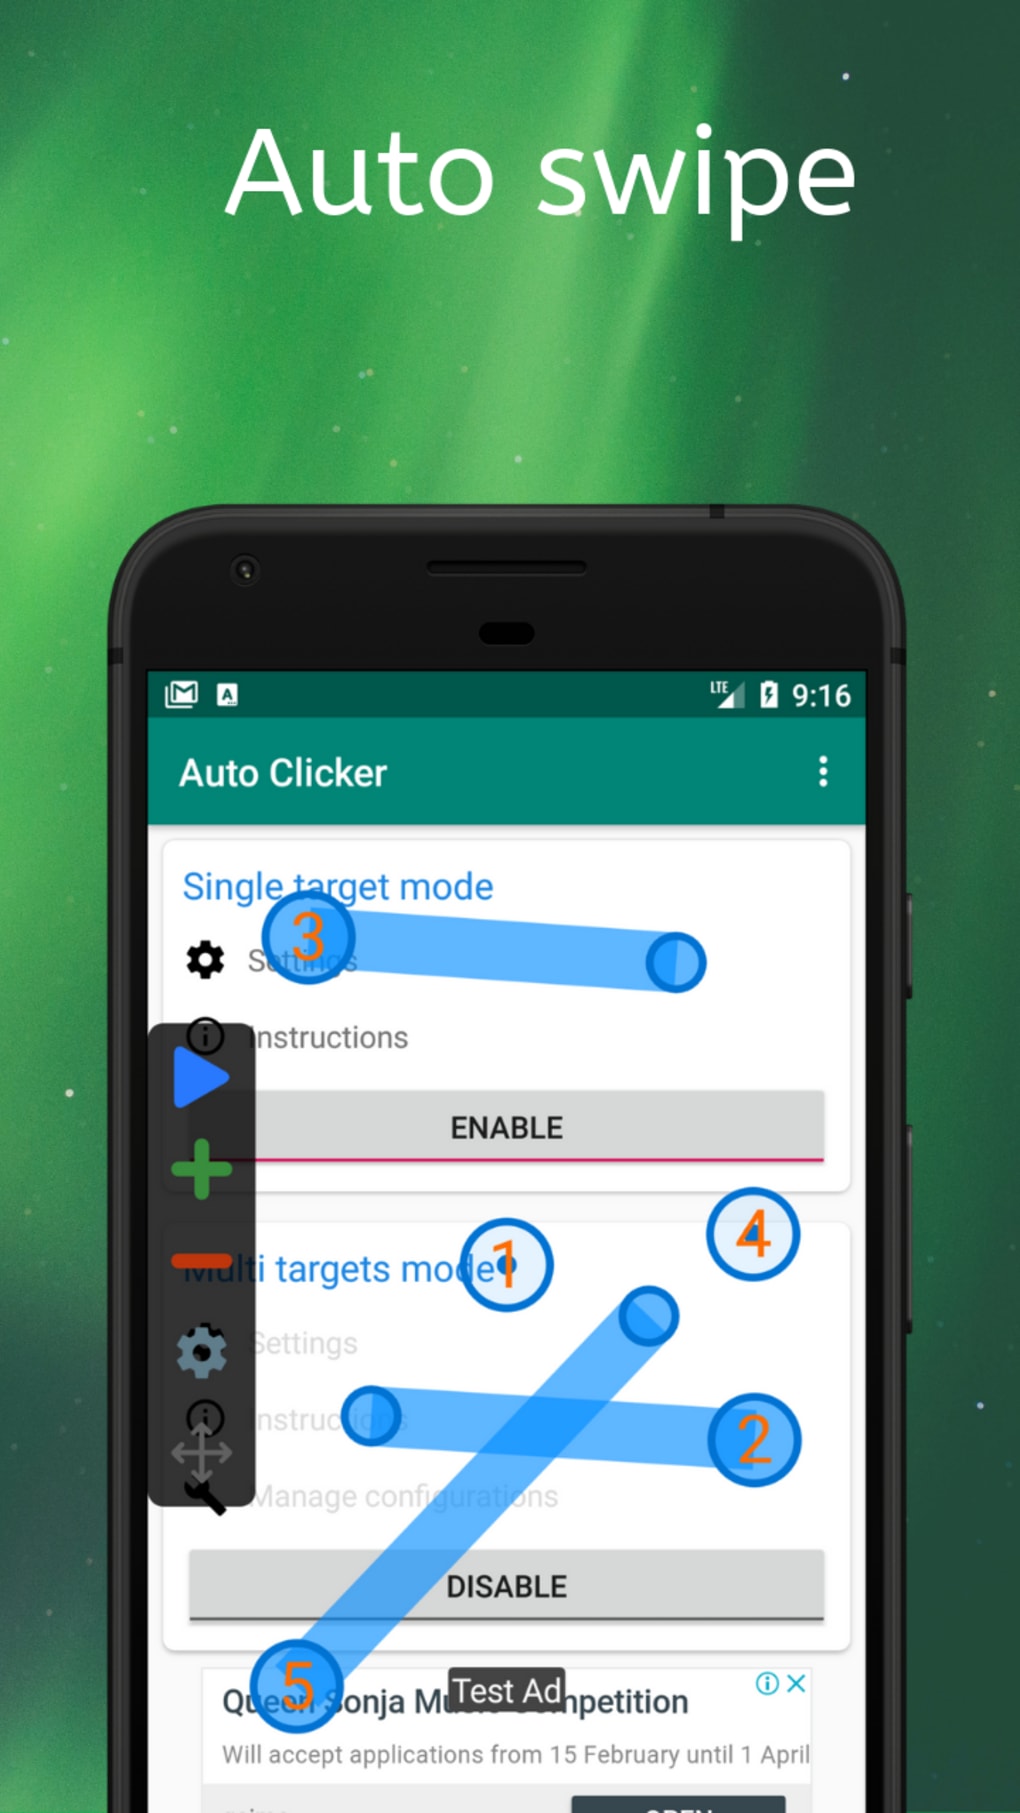 Download Auto Clicker - Automatic tap on PC with MEmu